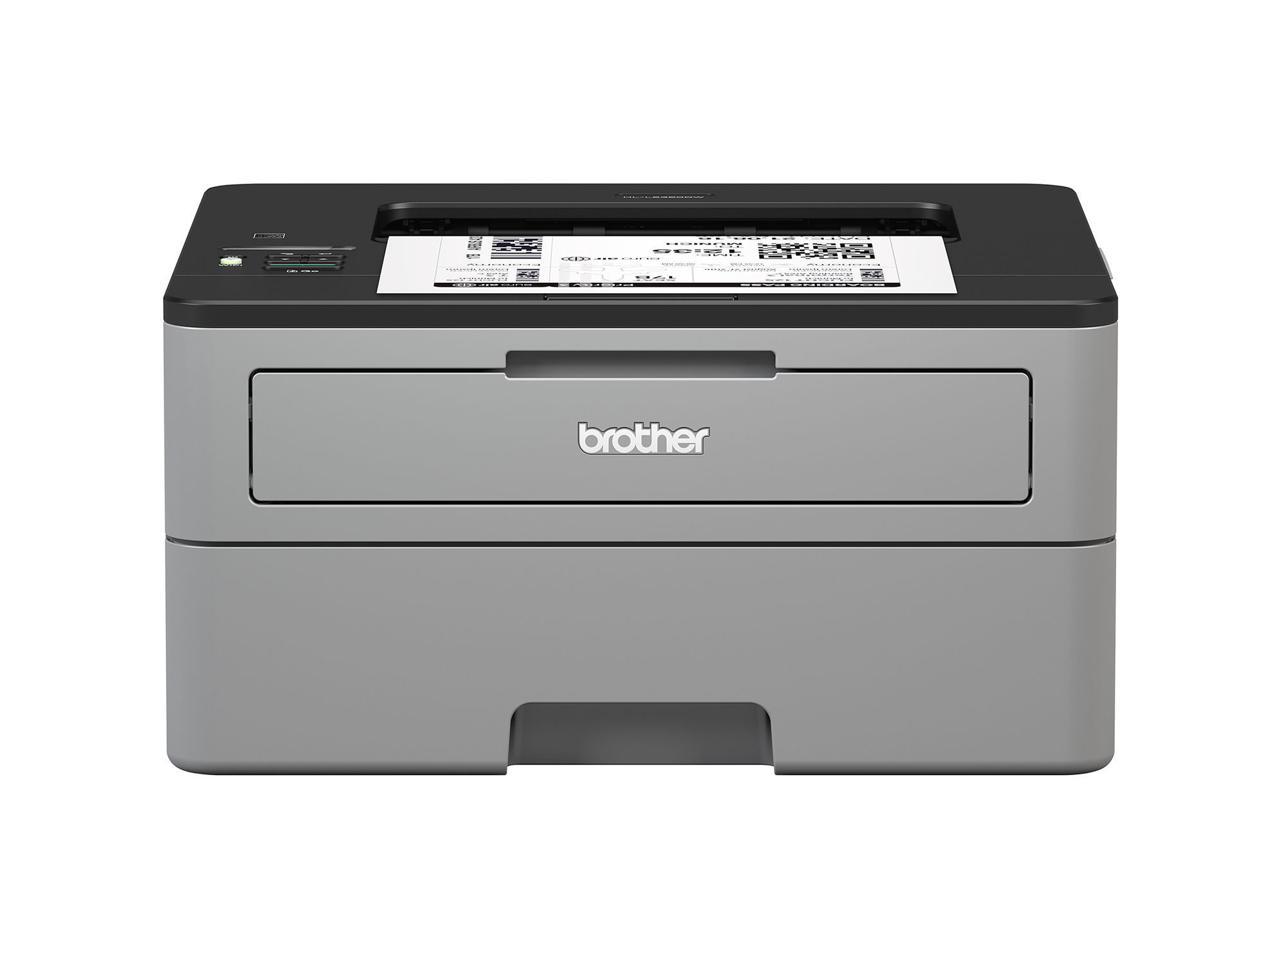 Brother HL-L2350DW Monochrome Laser Printer with USB & Wi-Fi Connectivity